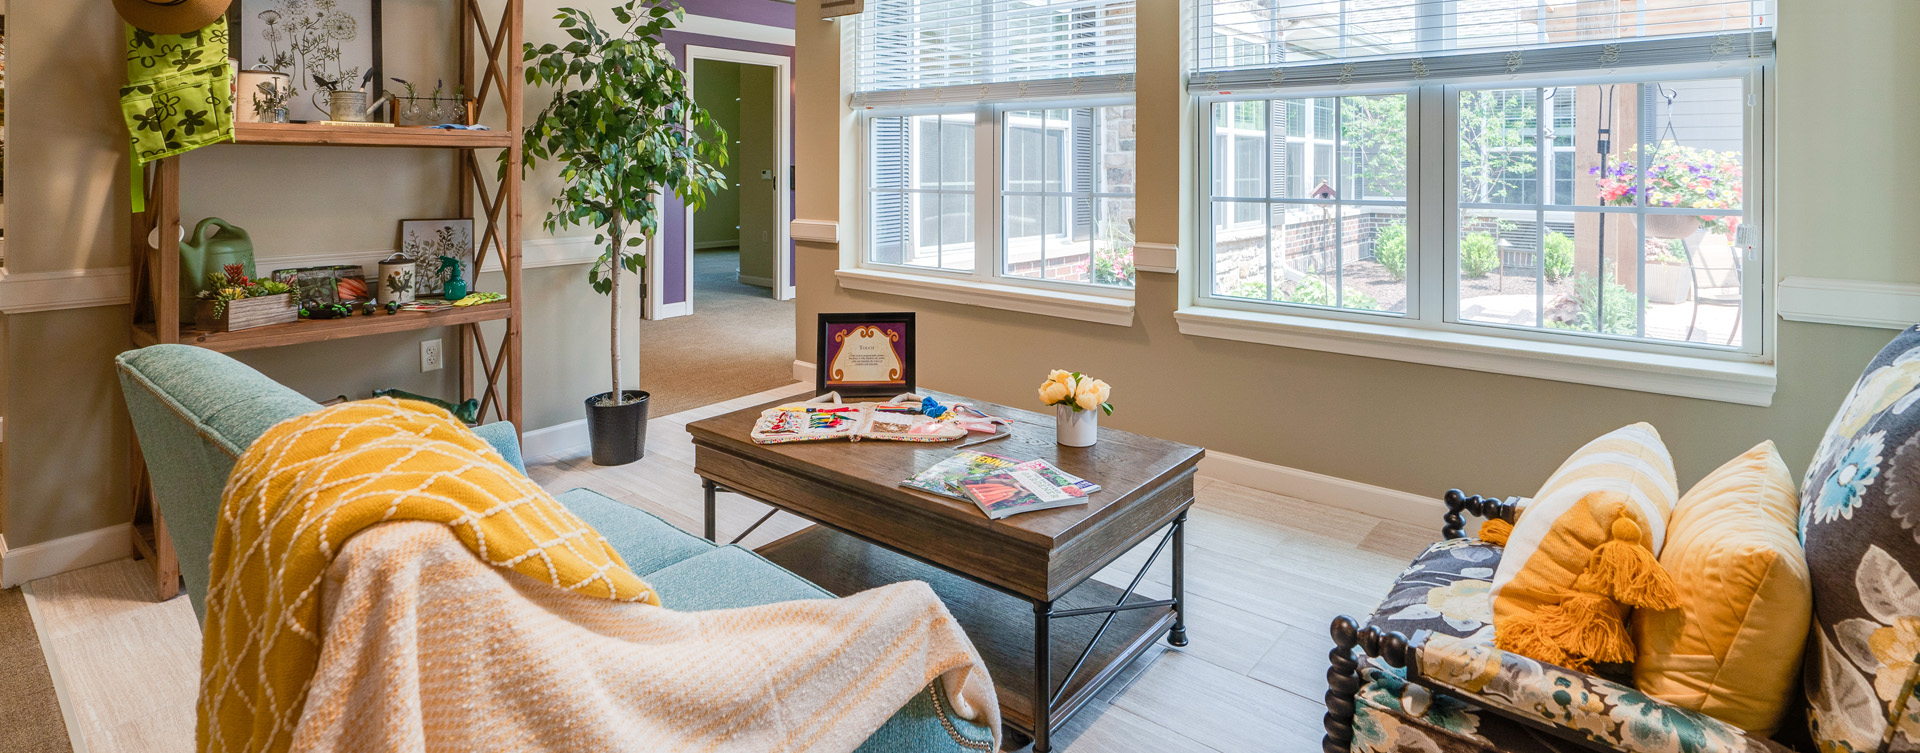 Enjoy the view of the outdoors from the sunroom at Bickford of Chesapeake